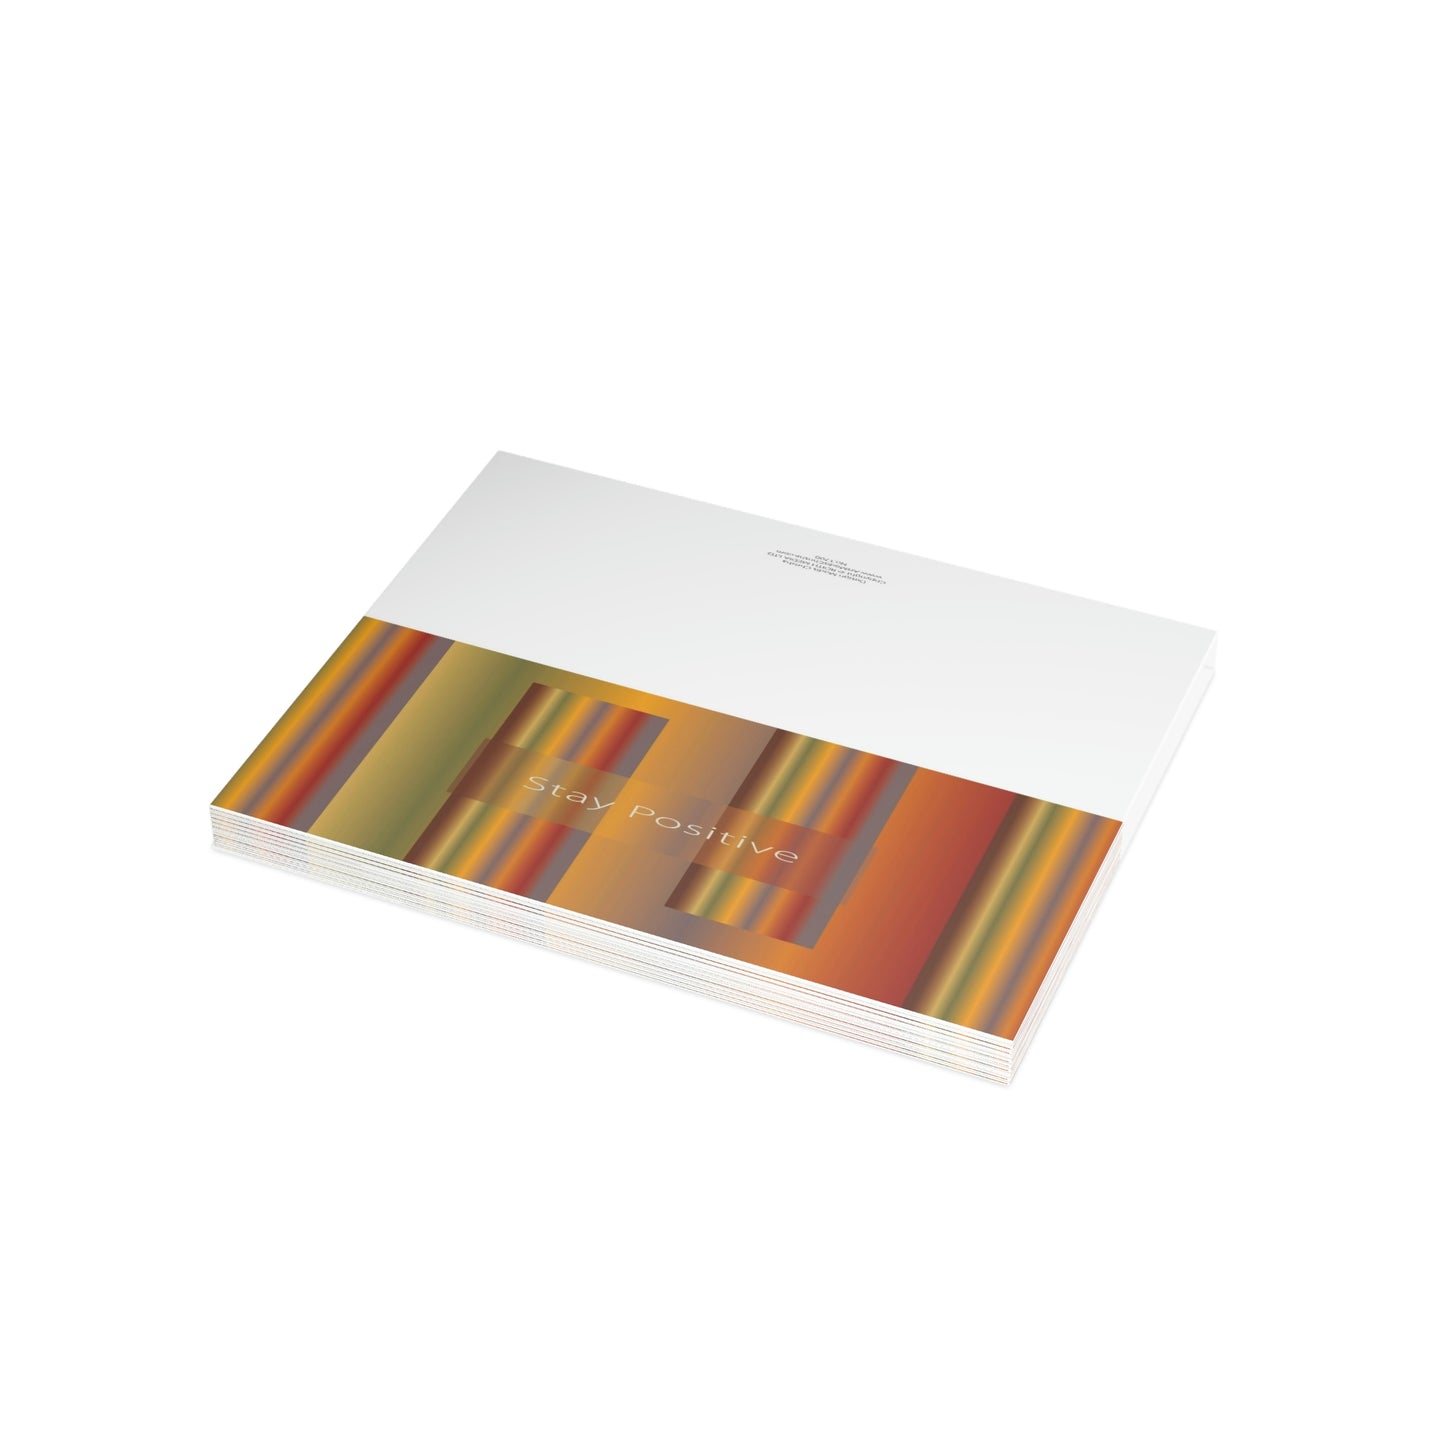 Folded Greeting Cards Horizontal (1, 10, 30, and 50pcs) Stay Positive - Design No.1700